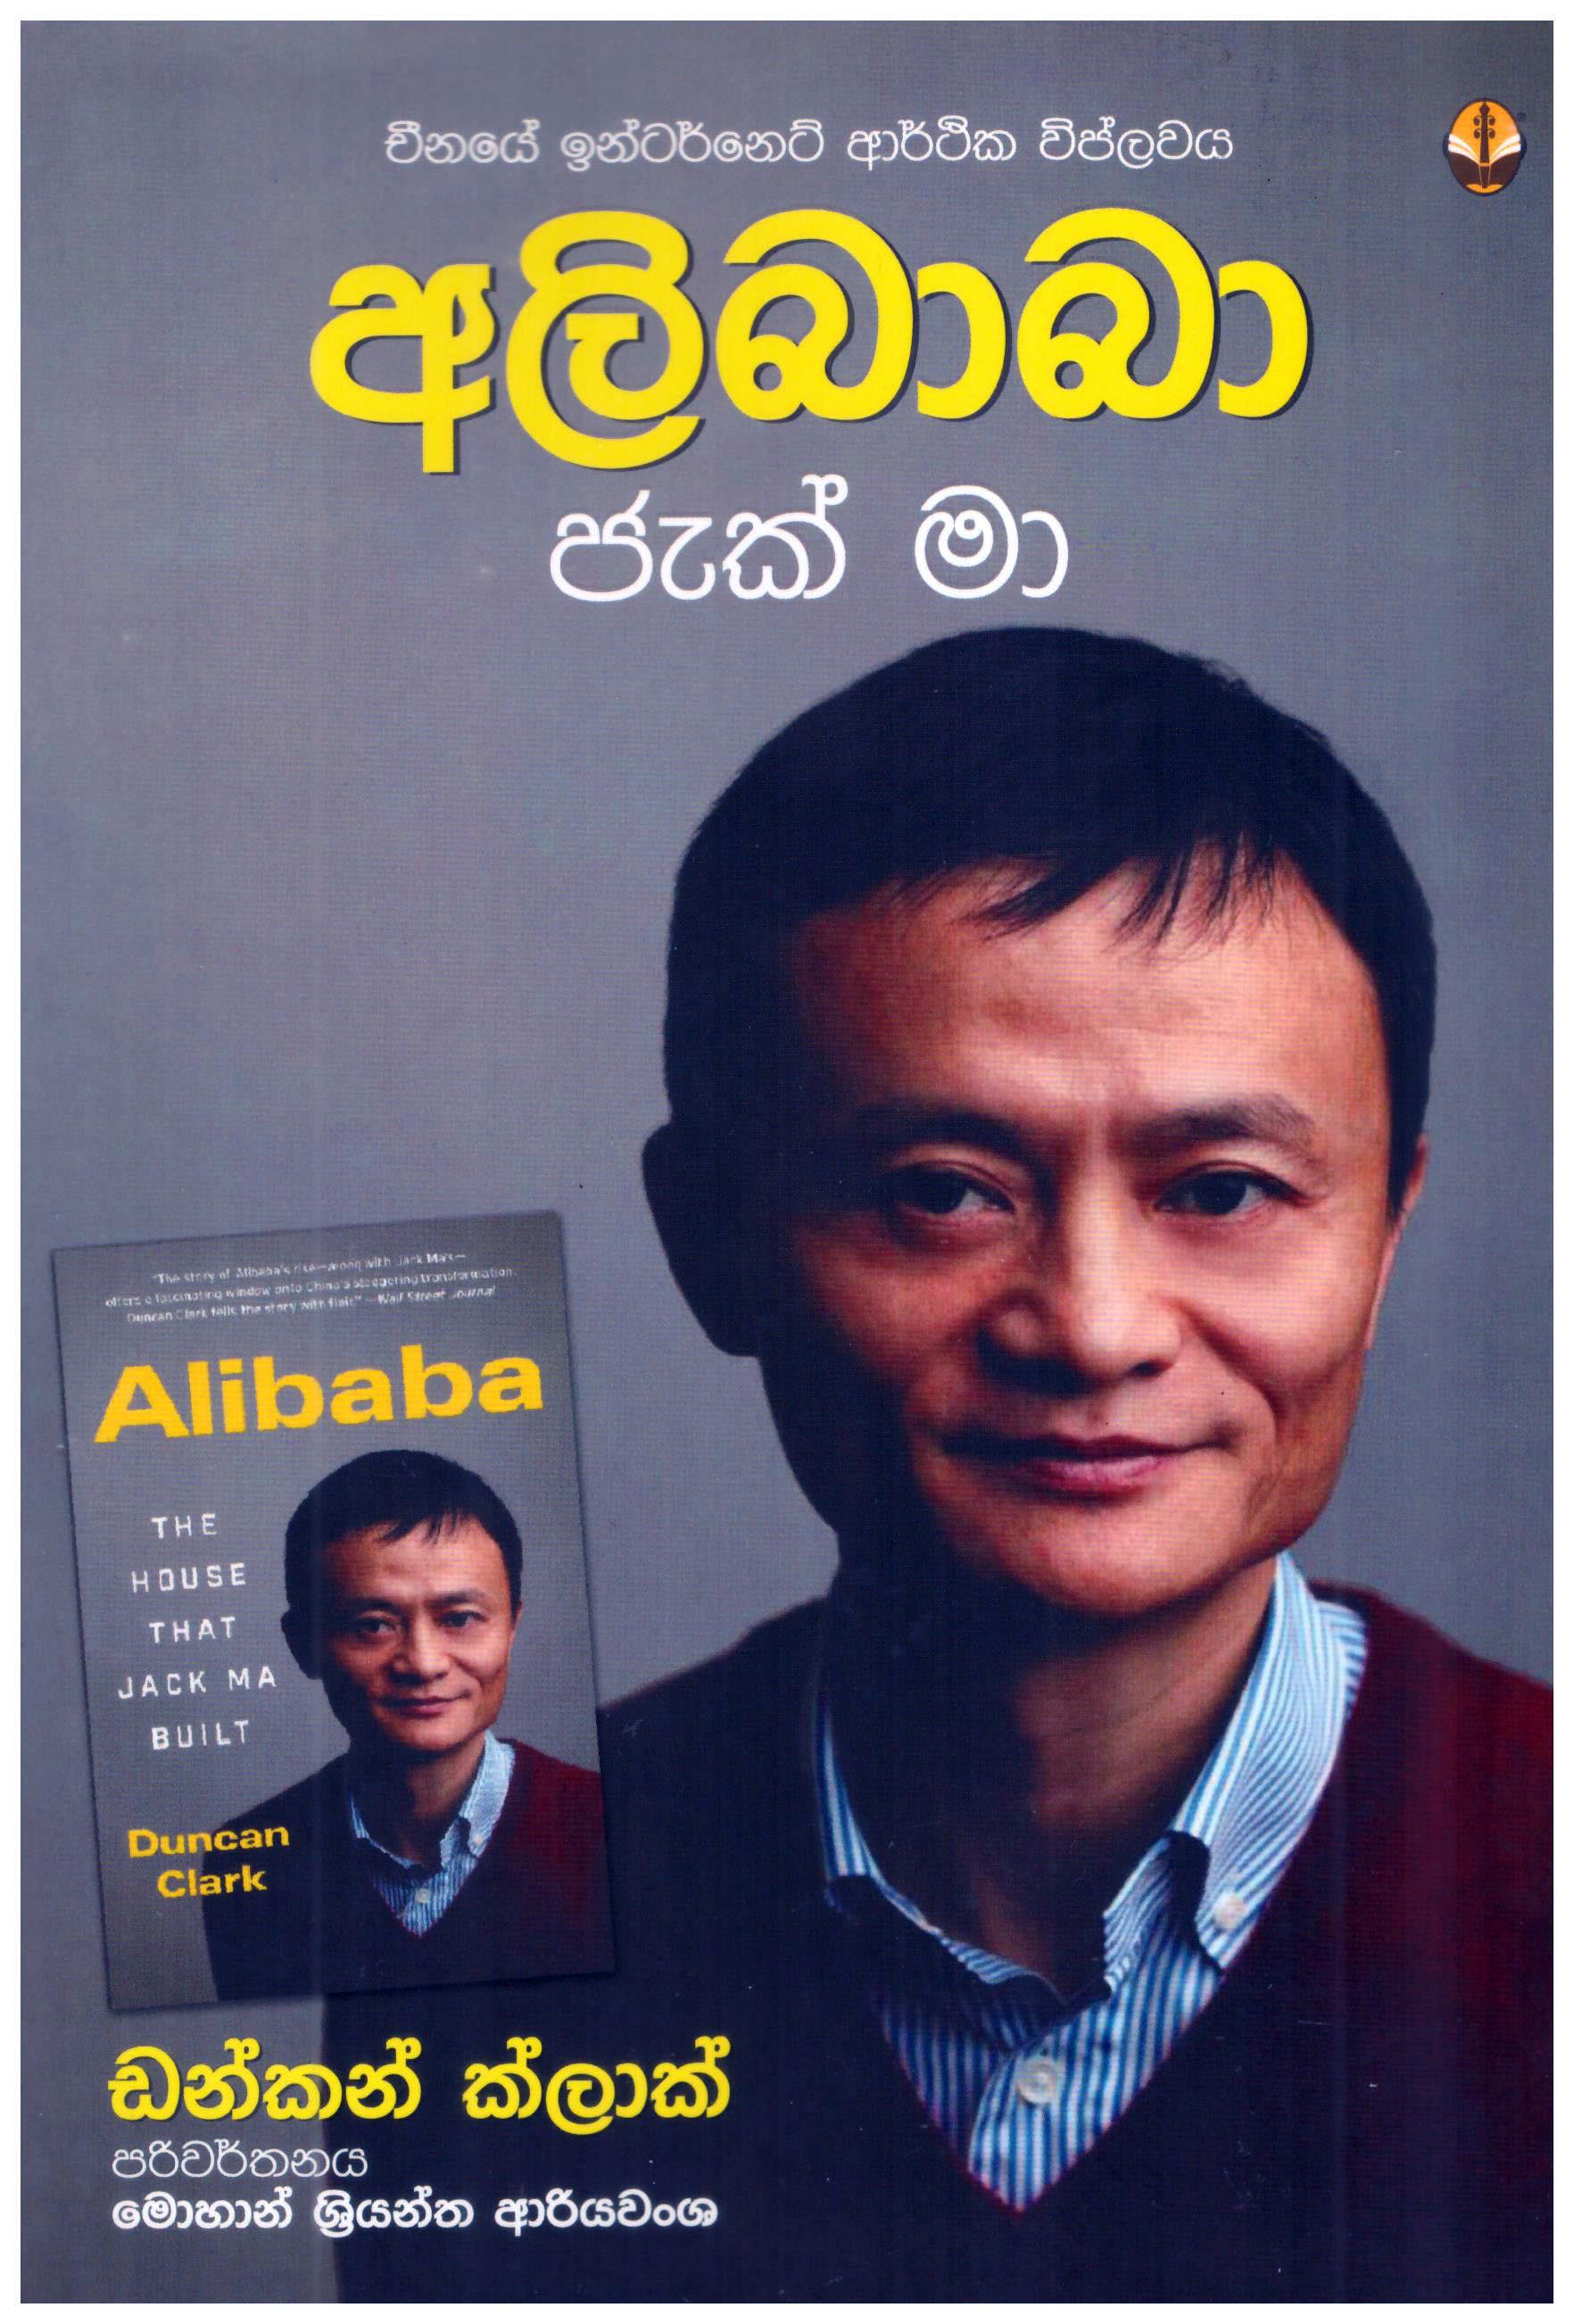 Alibaba Jack Ma Translation of Alibaba the House That Jack Ma Built By Duncan Clark